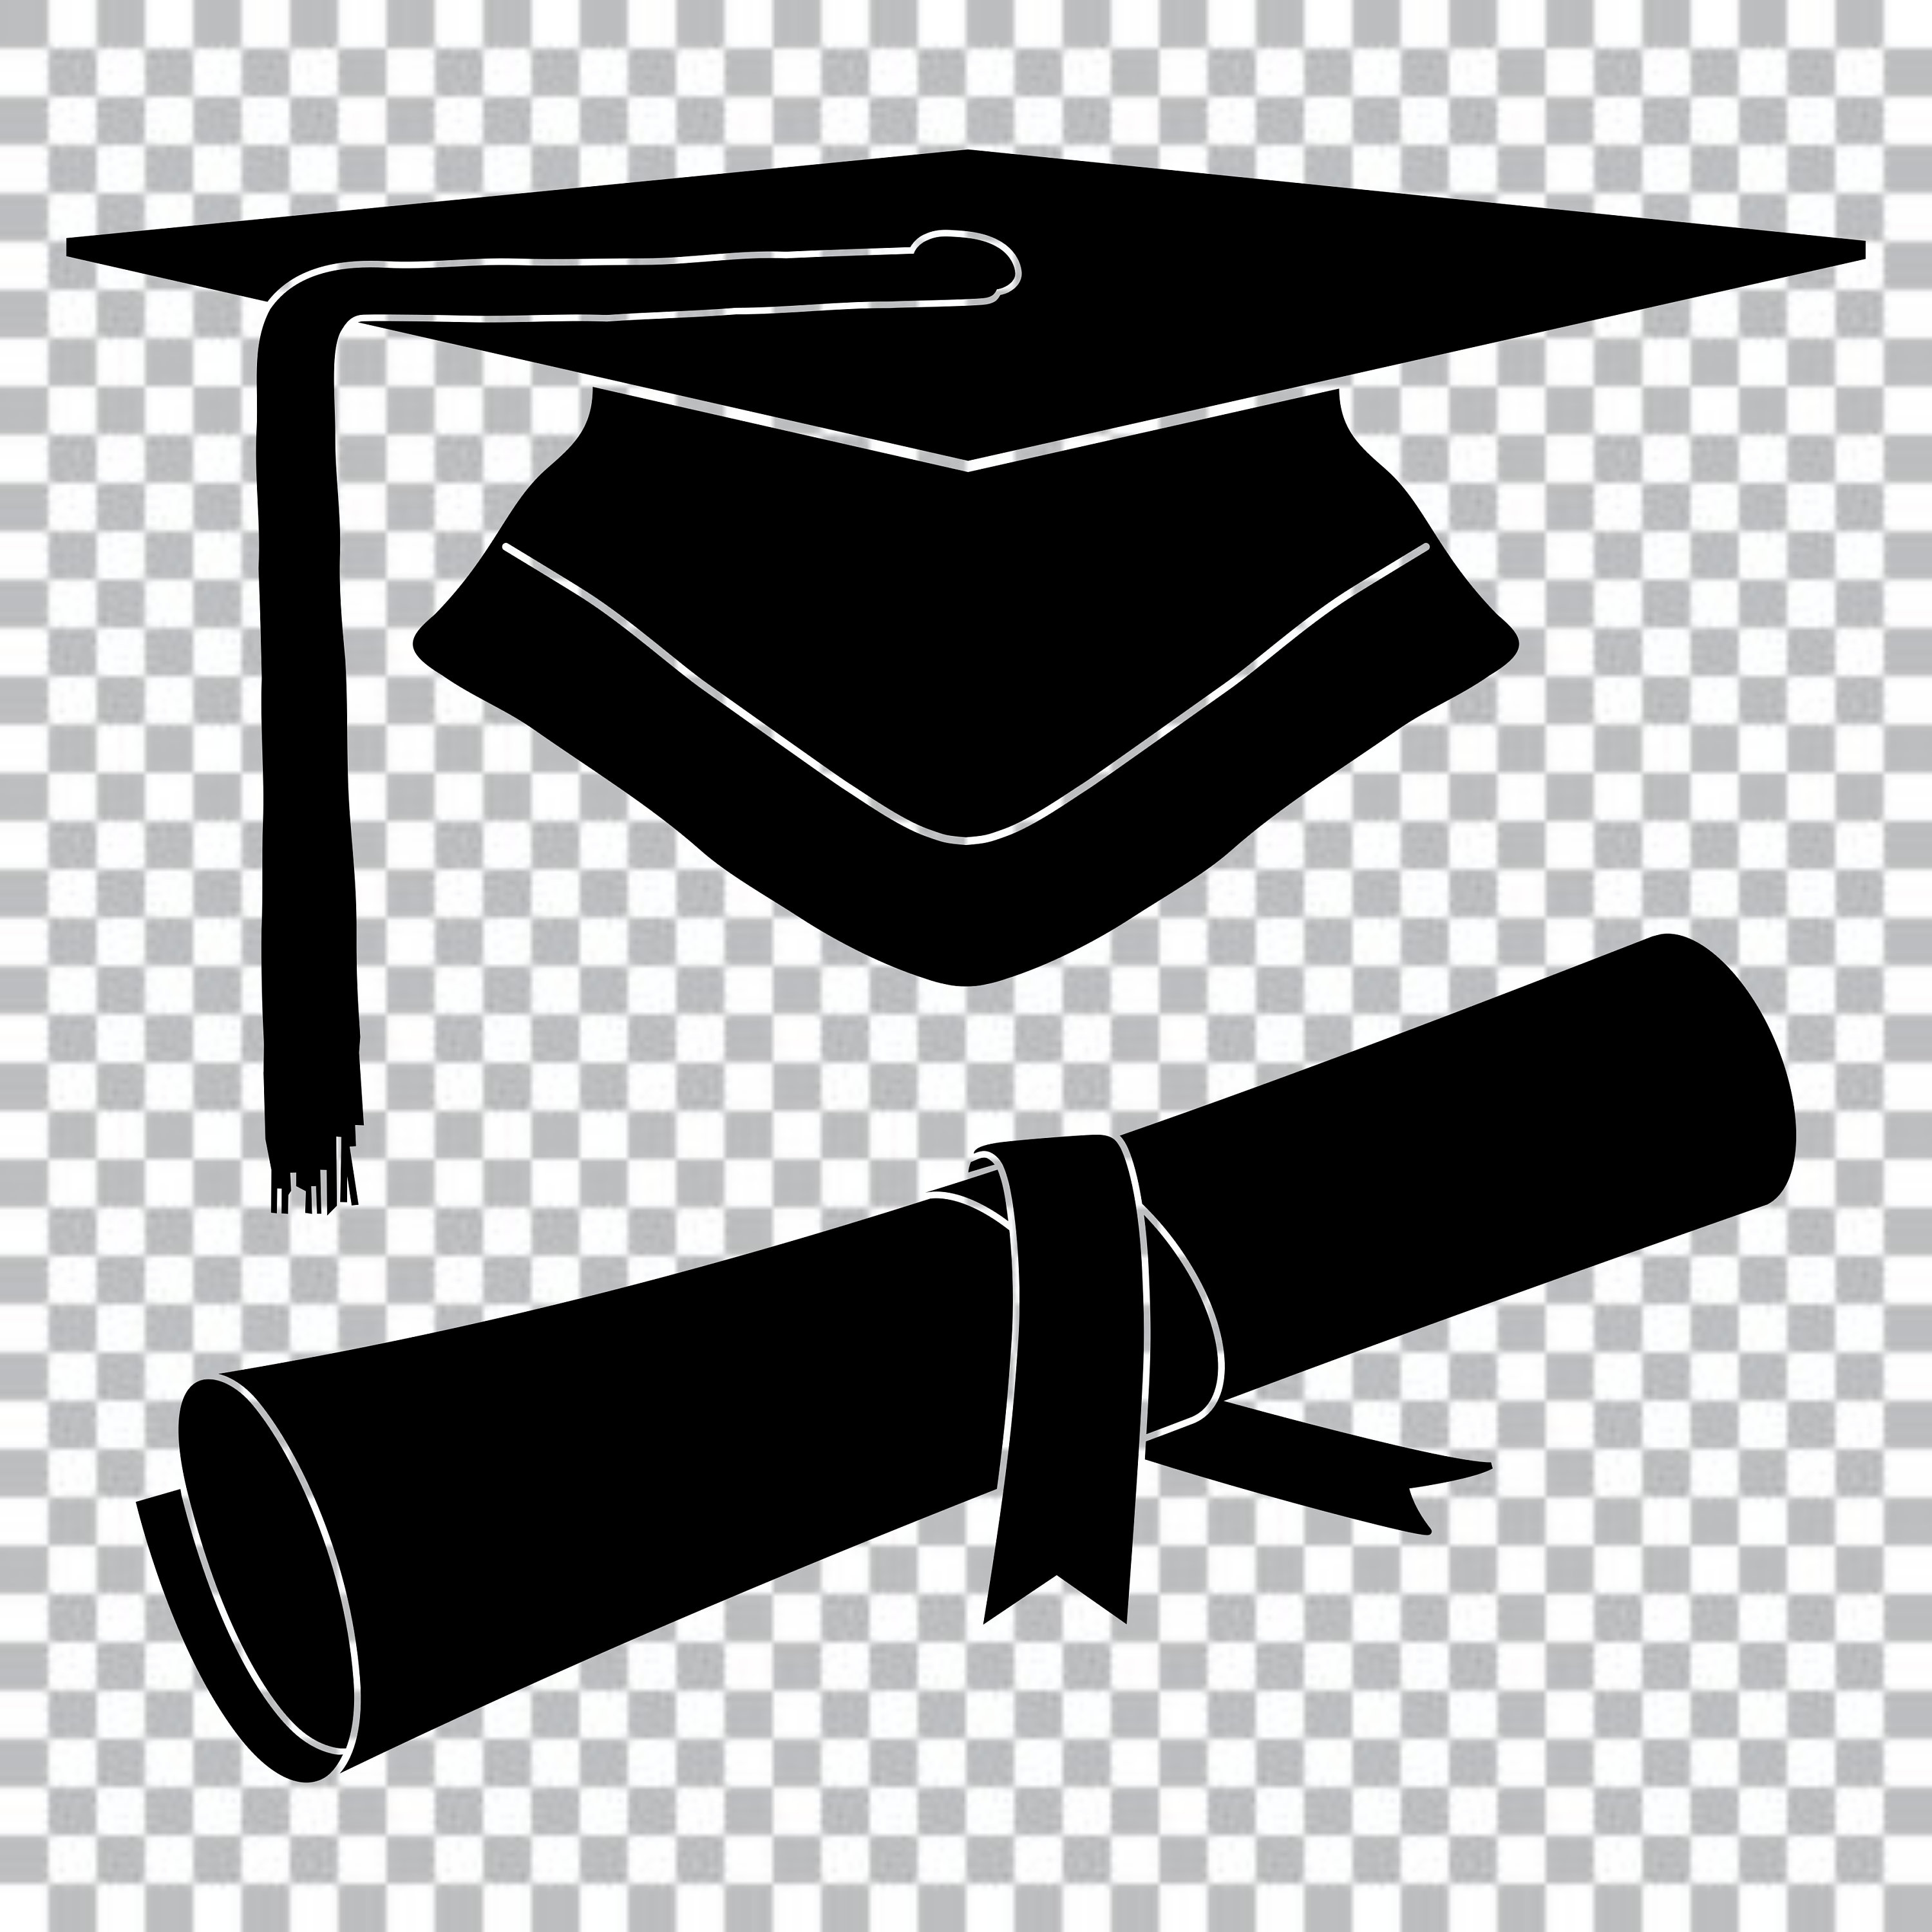 Document. Rolled and unrolled diploma paper scroll with stamp. Certificate  degree of university, college or school graduates alumni success and course  completion. Graduation test blank with red ribbon Stock Vector